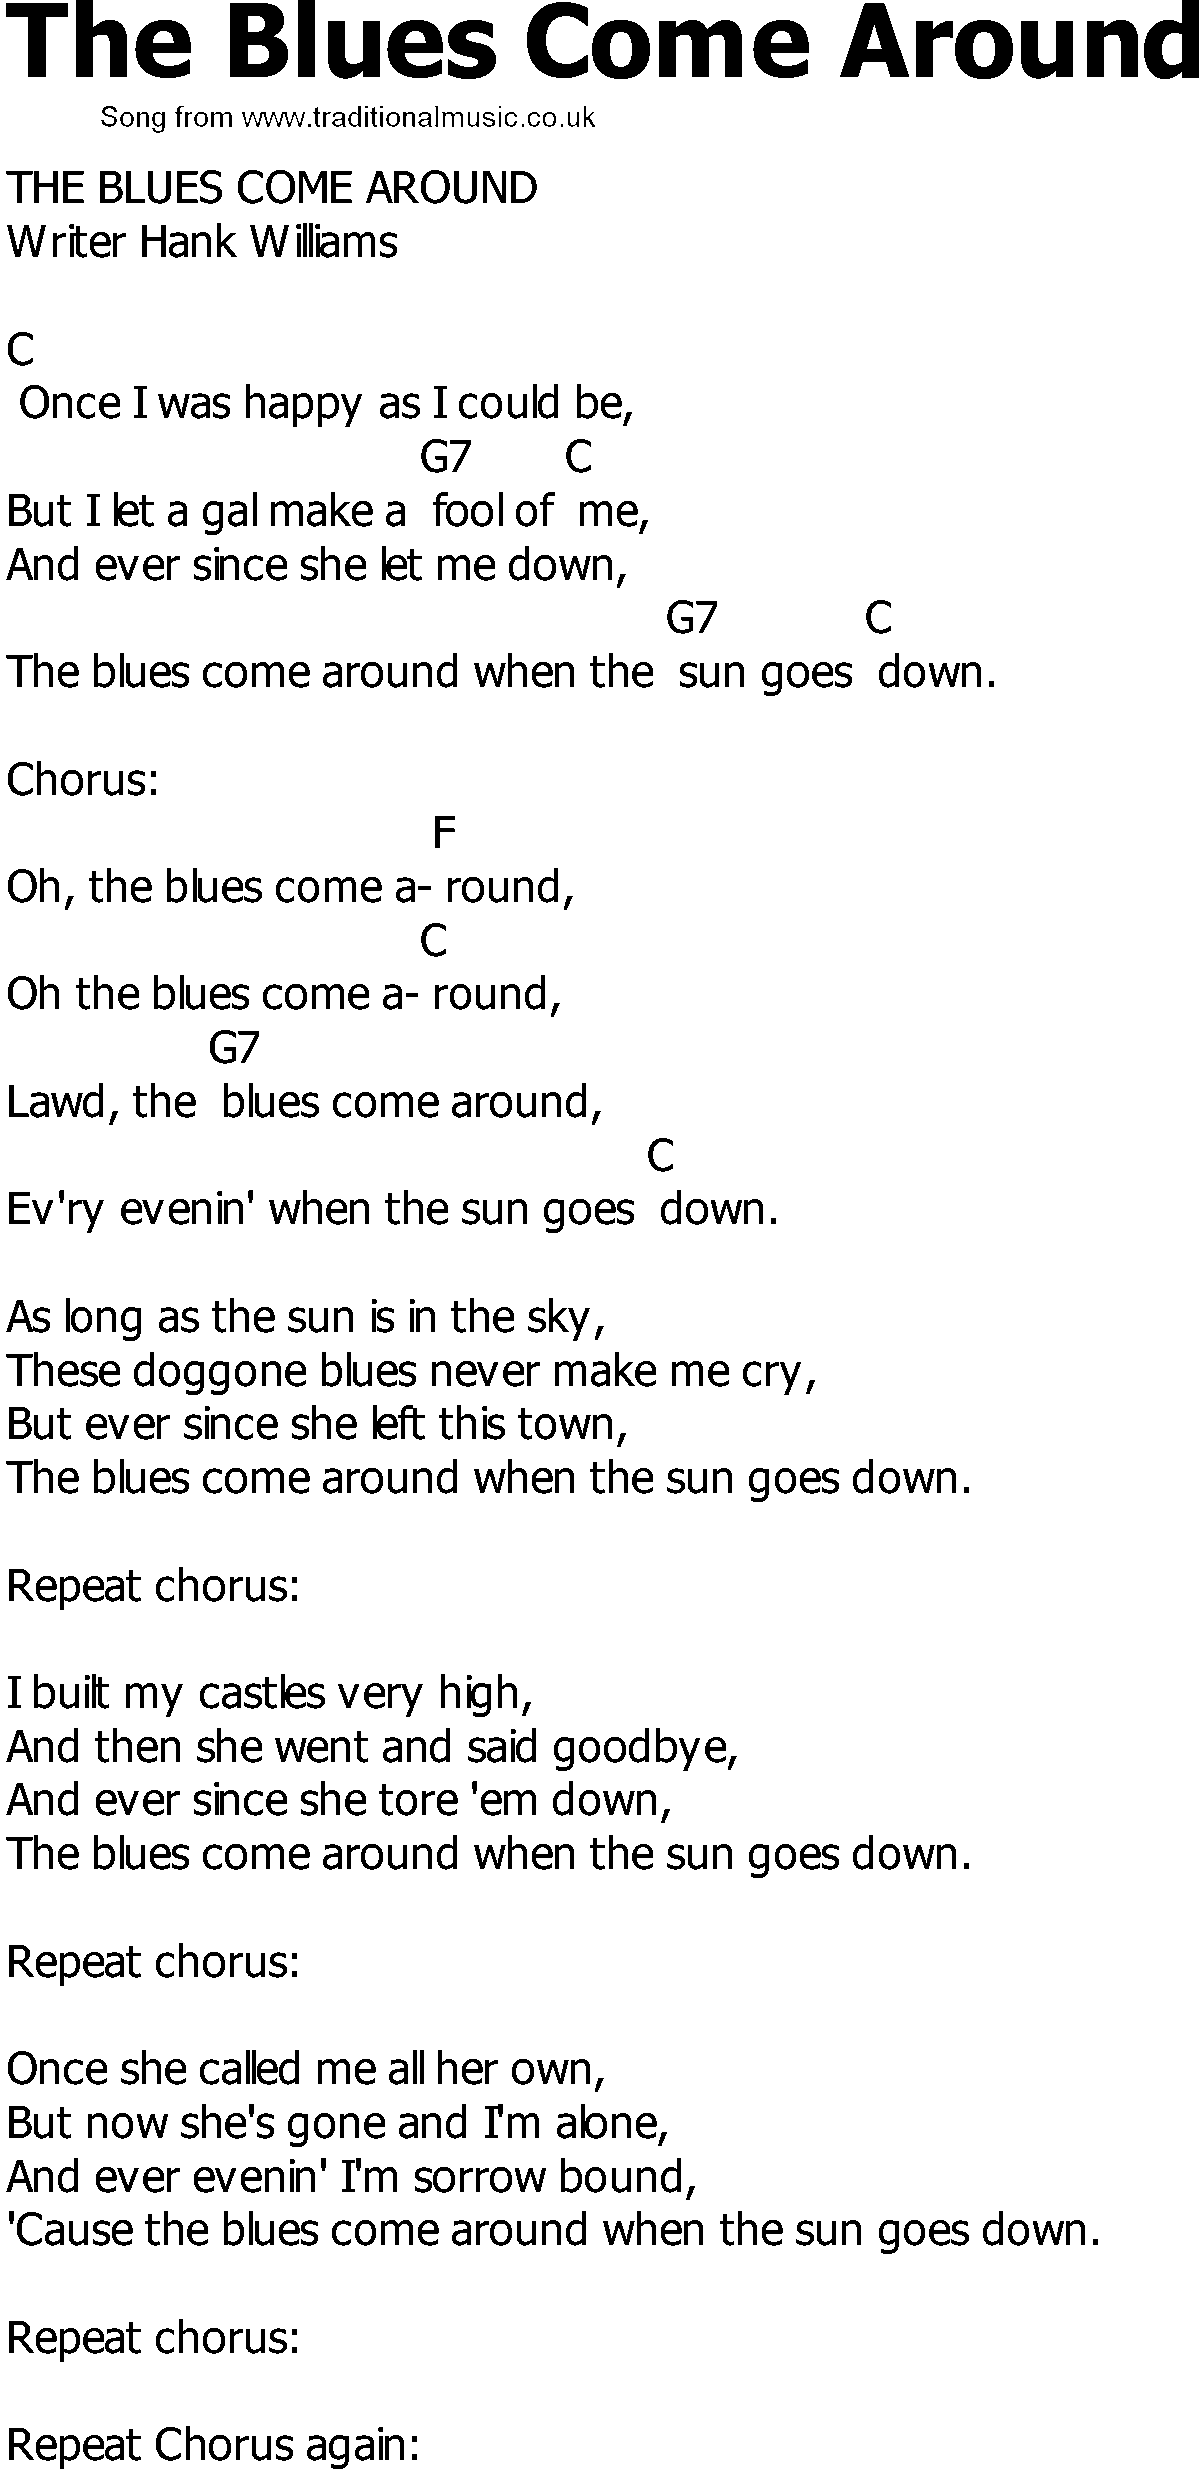 Old Country song lyrics with chords - The Blues Come Around